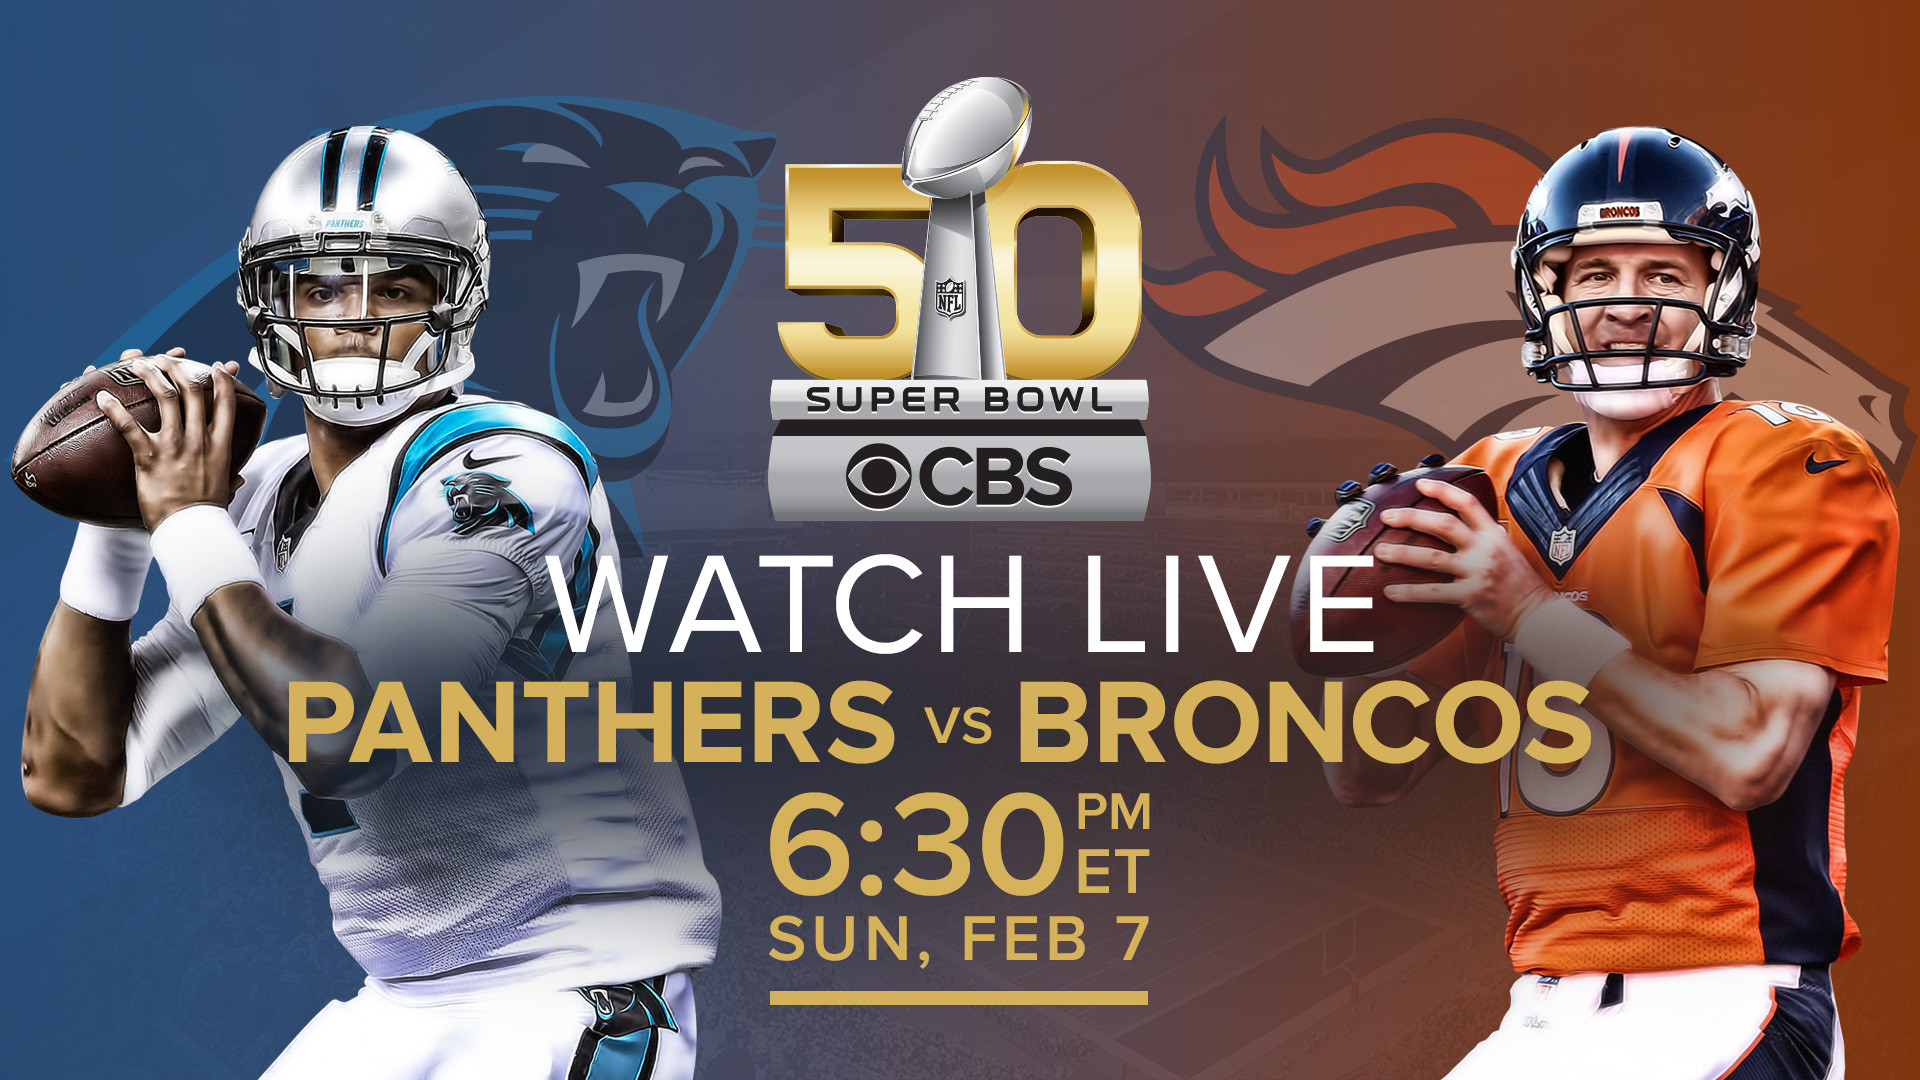 1920x1080 How to stream Super Bowl 50 online for free without cable